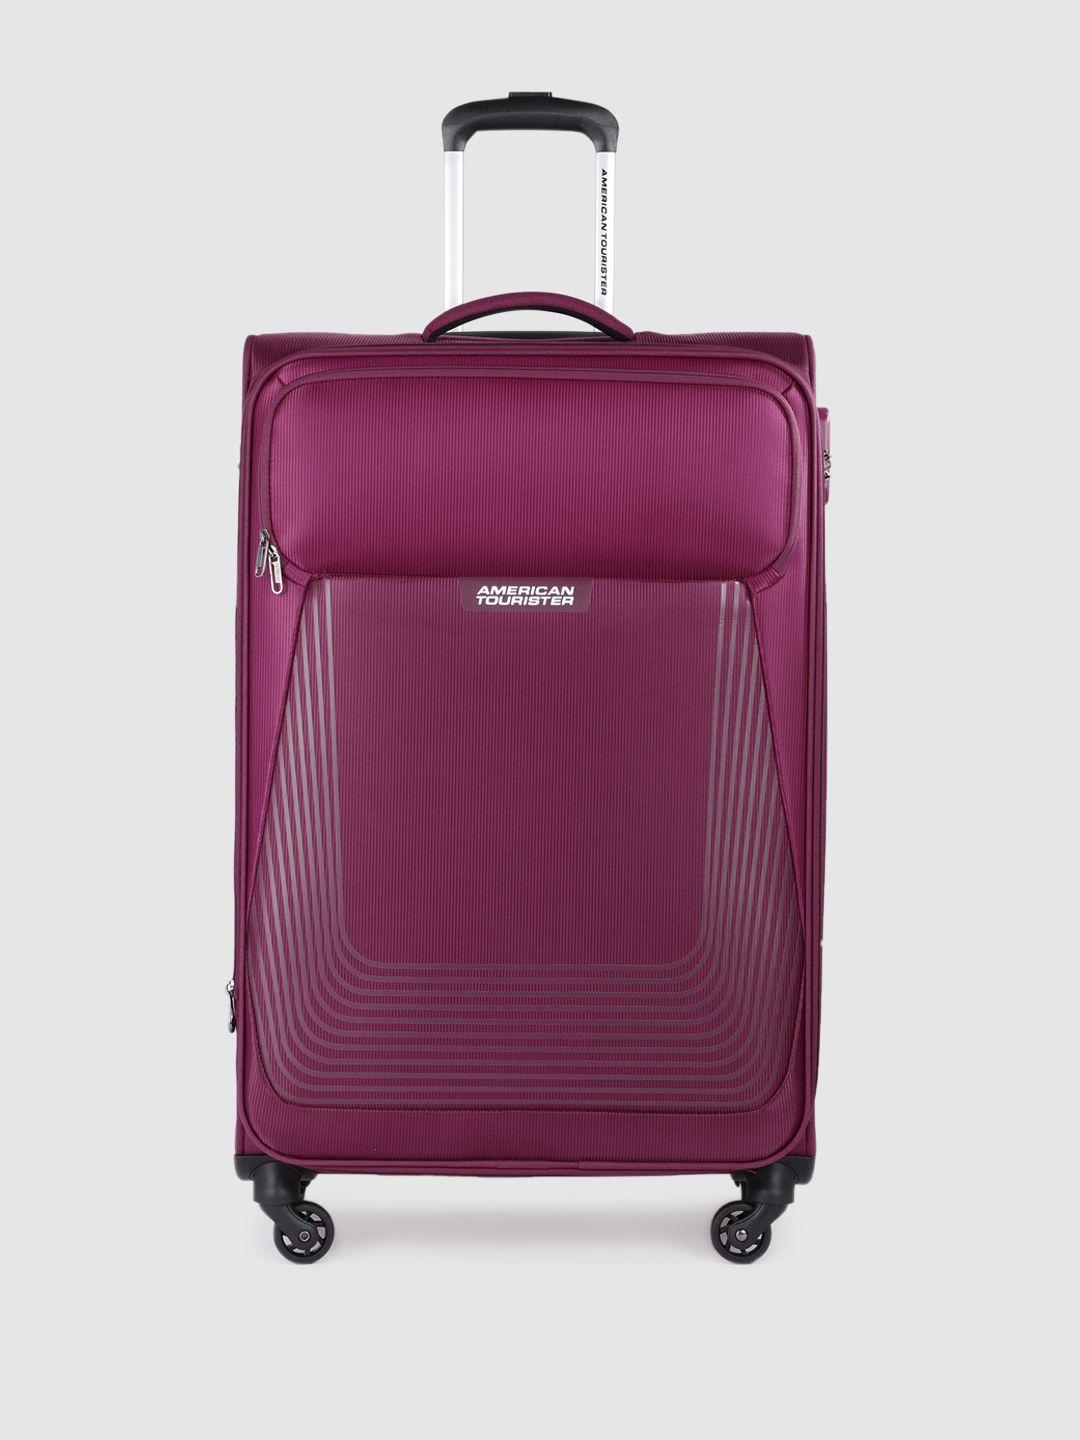 AMERICAN TOURISTER SOUTHSIDE LITE Striped Large Trolley Suitcase